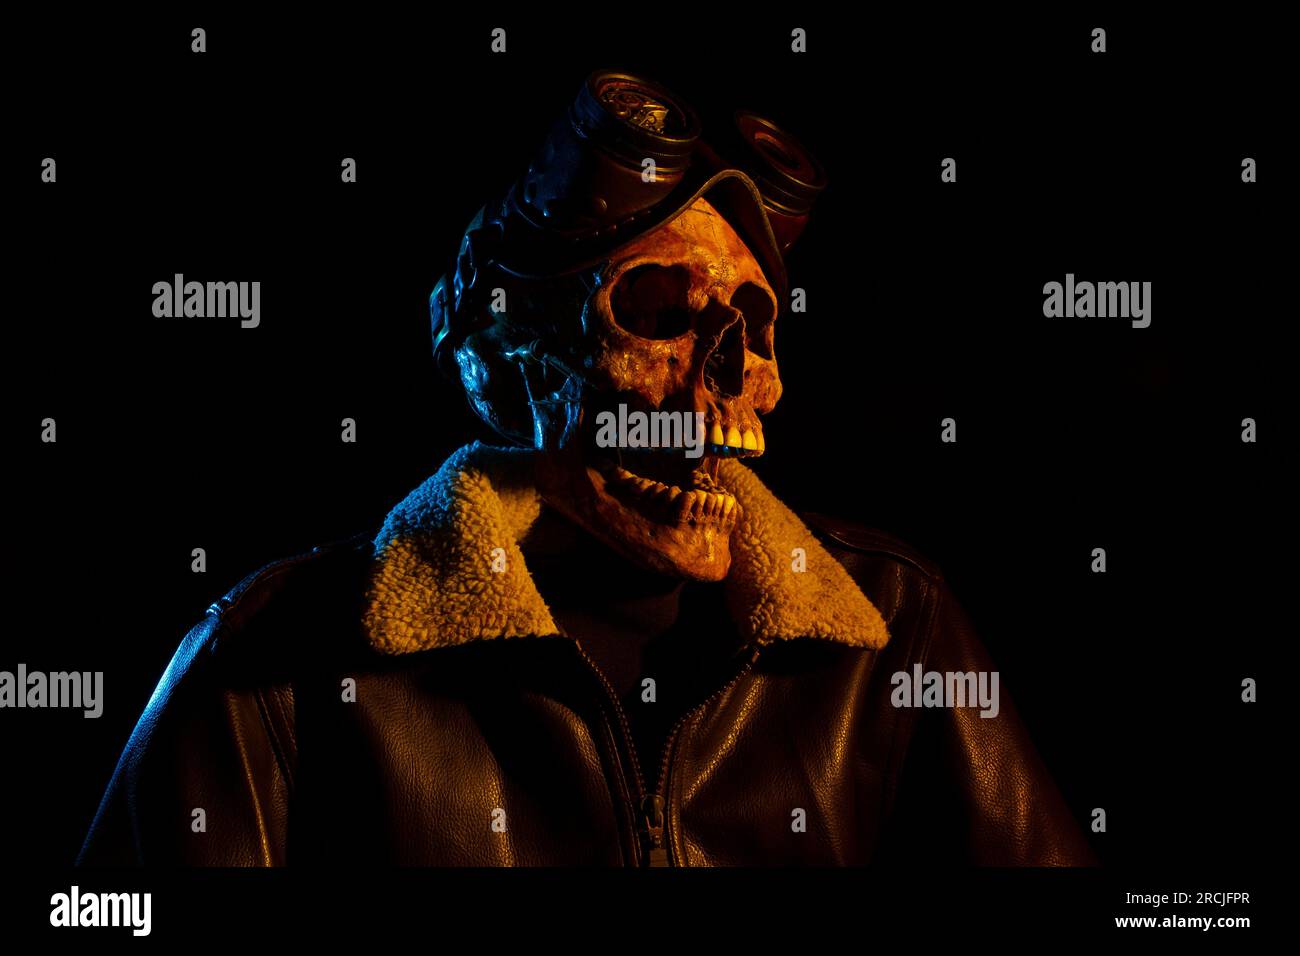 Skull with leather jacket and steampunk goggles. Aviator costume. Colored lights Stock Photo